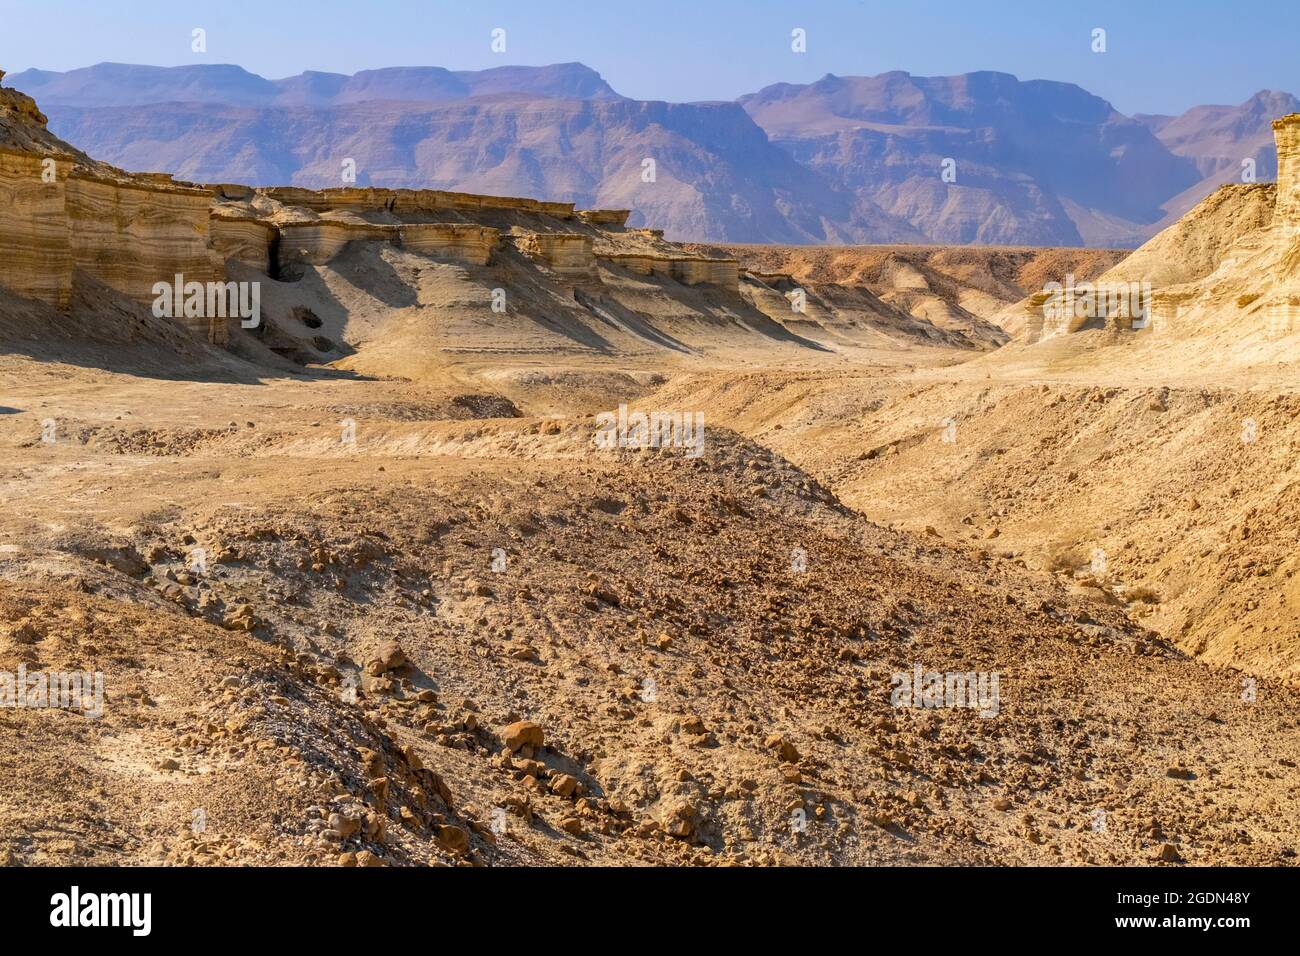 Marl stone formations. Eroded cliffs made of marl. Marl is a calcium carbonate-rich, mudstone formed from sedimentary deposits. Photographed in Israel Stock Photo